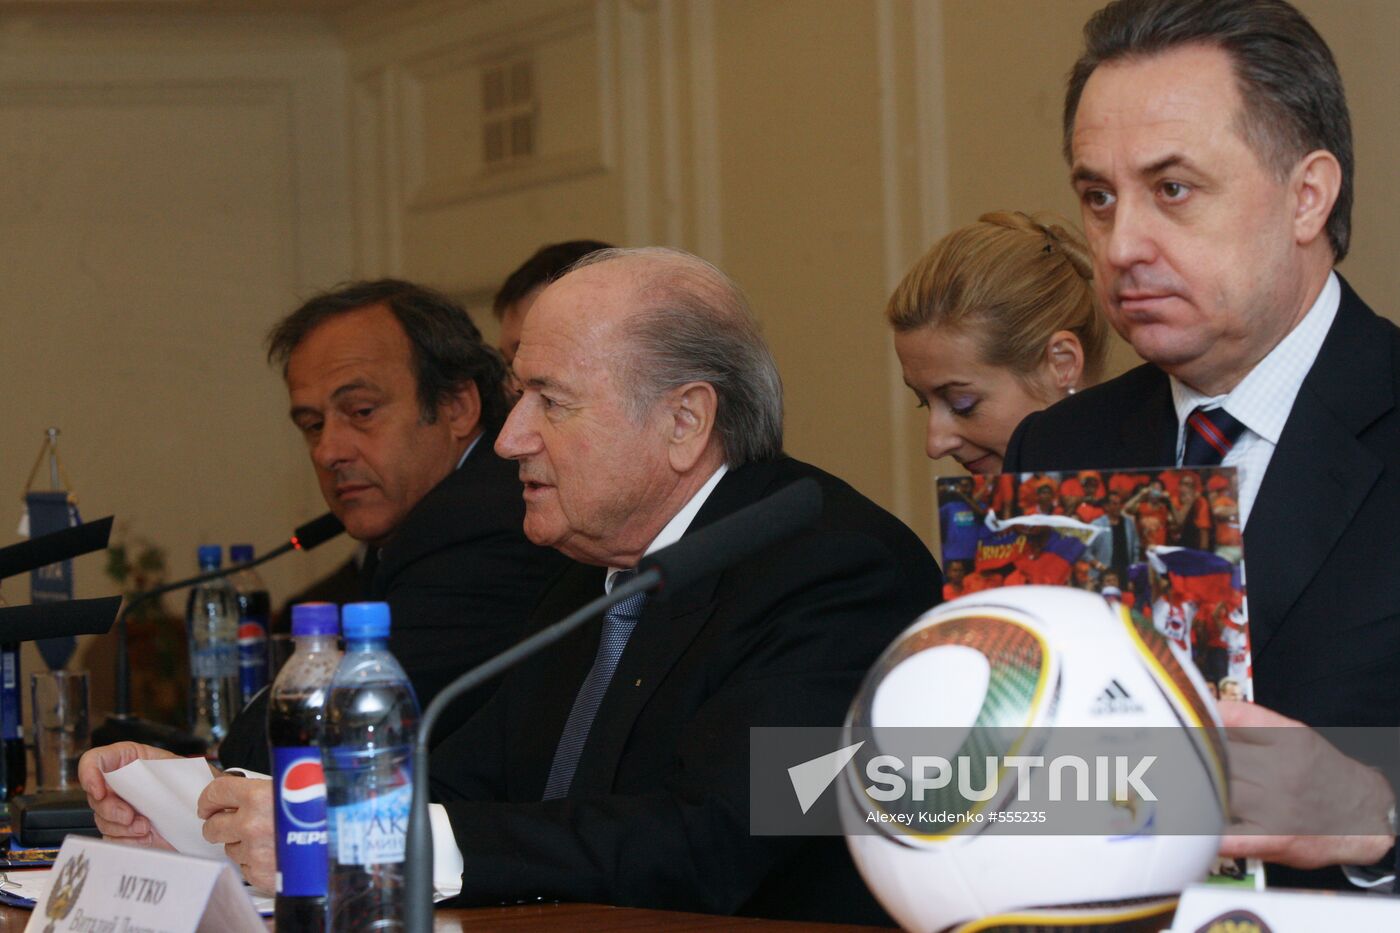 News conference by Joseph Blatter and Michel Platini